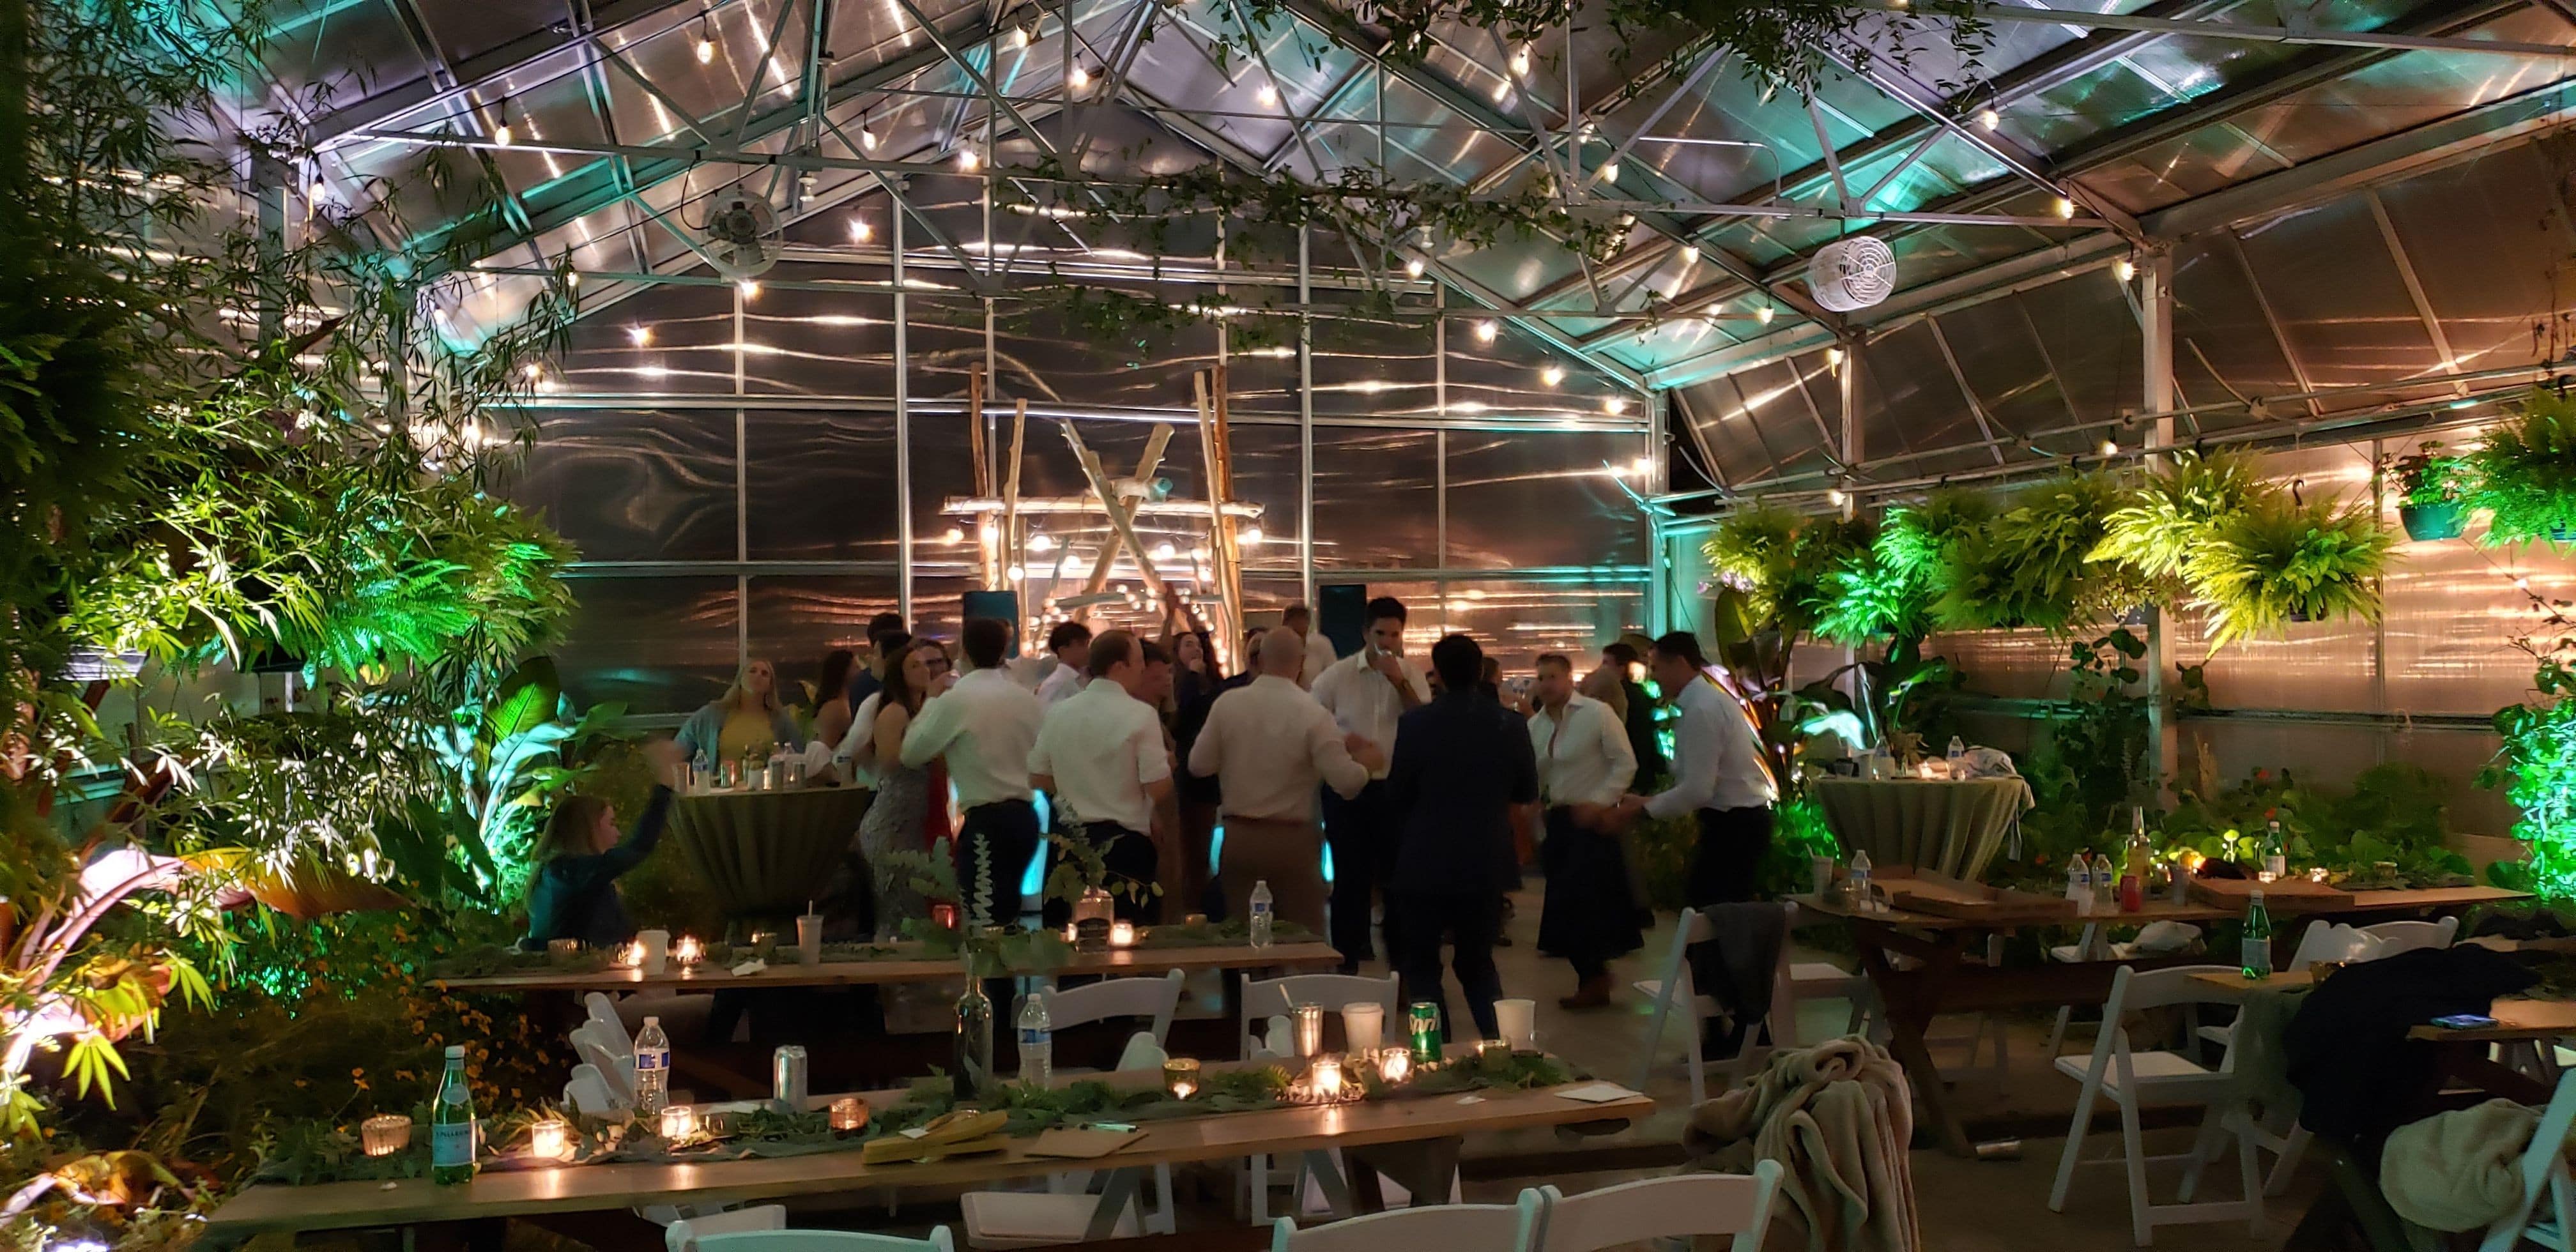 Wedding lighting with mint green and soft white up lighting inside the greenhouse of Sitio Events.